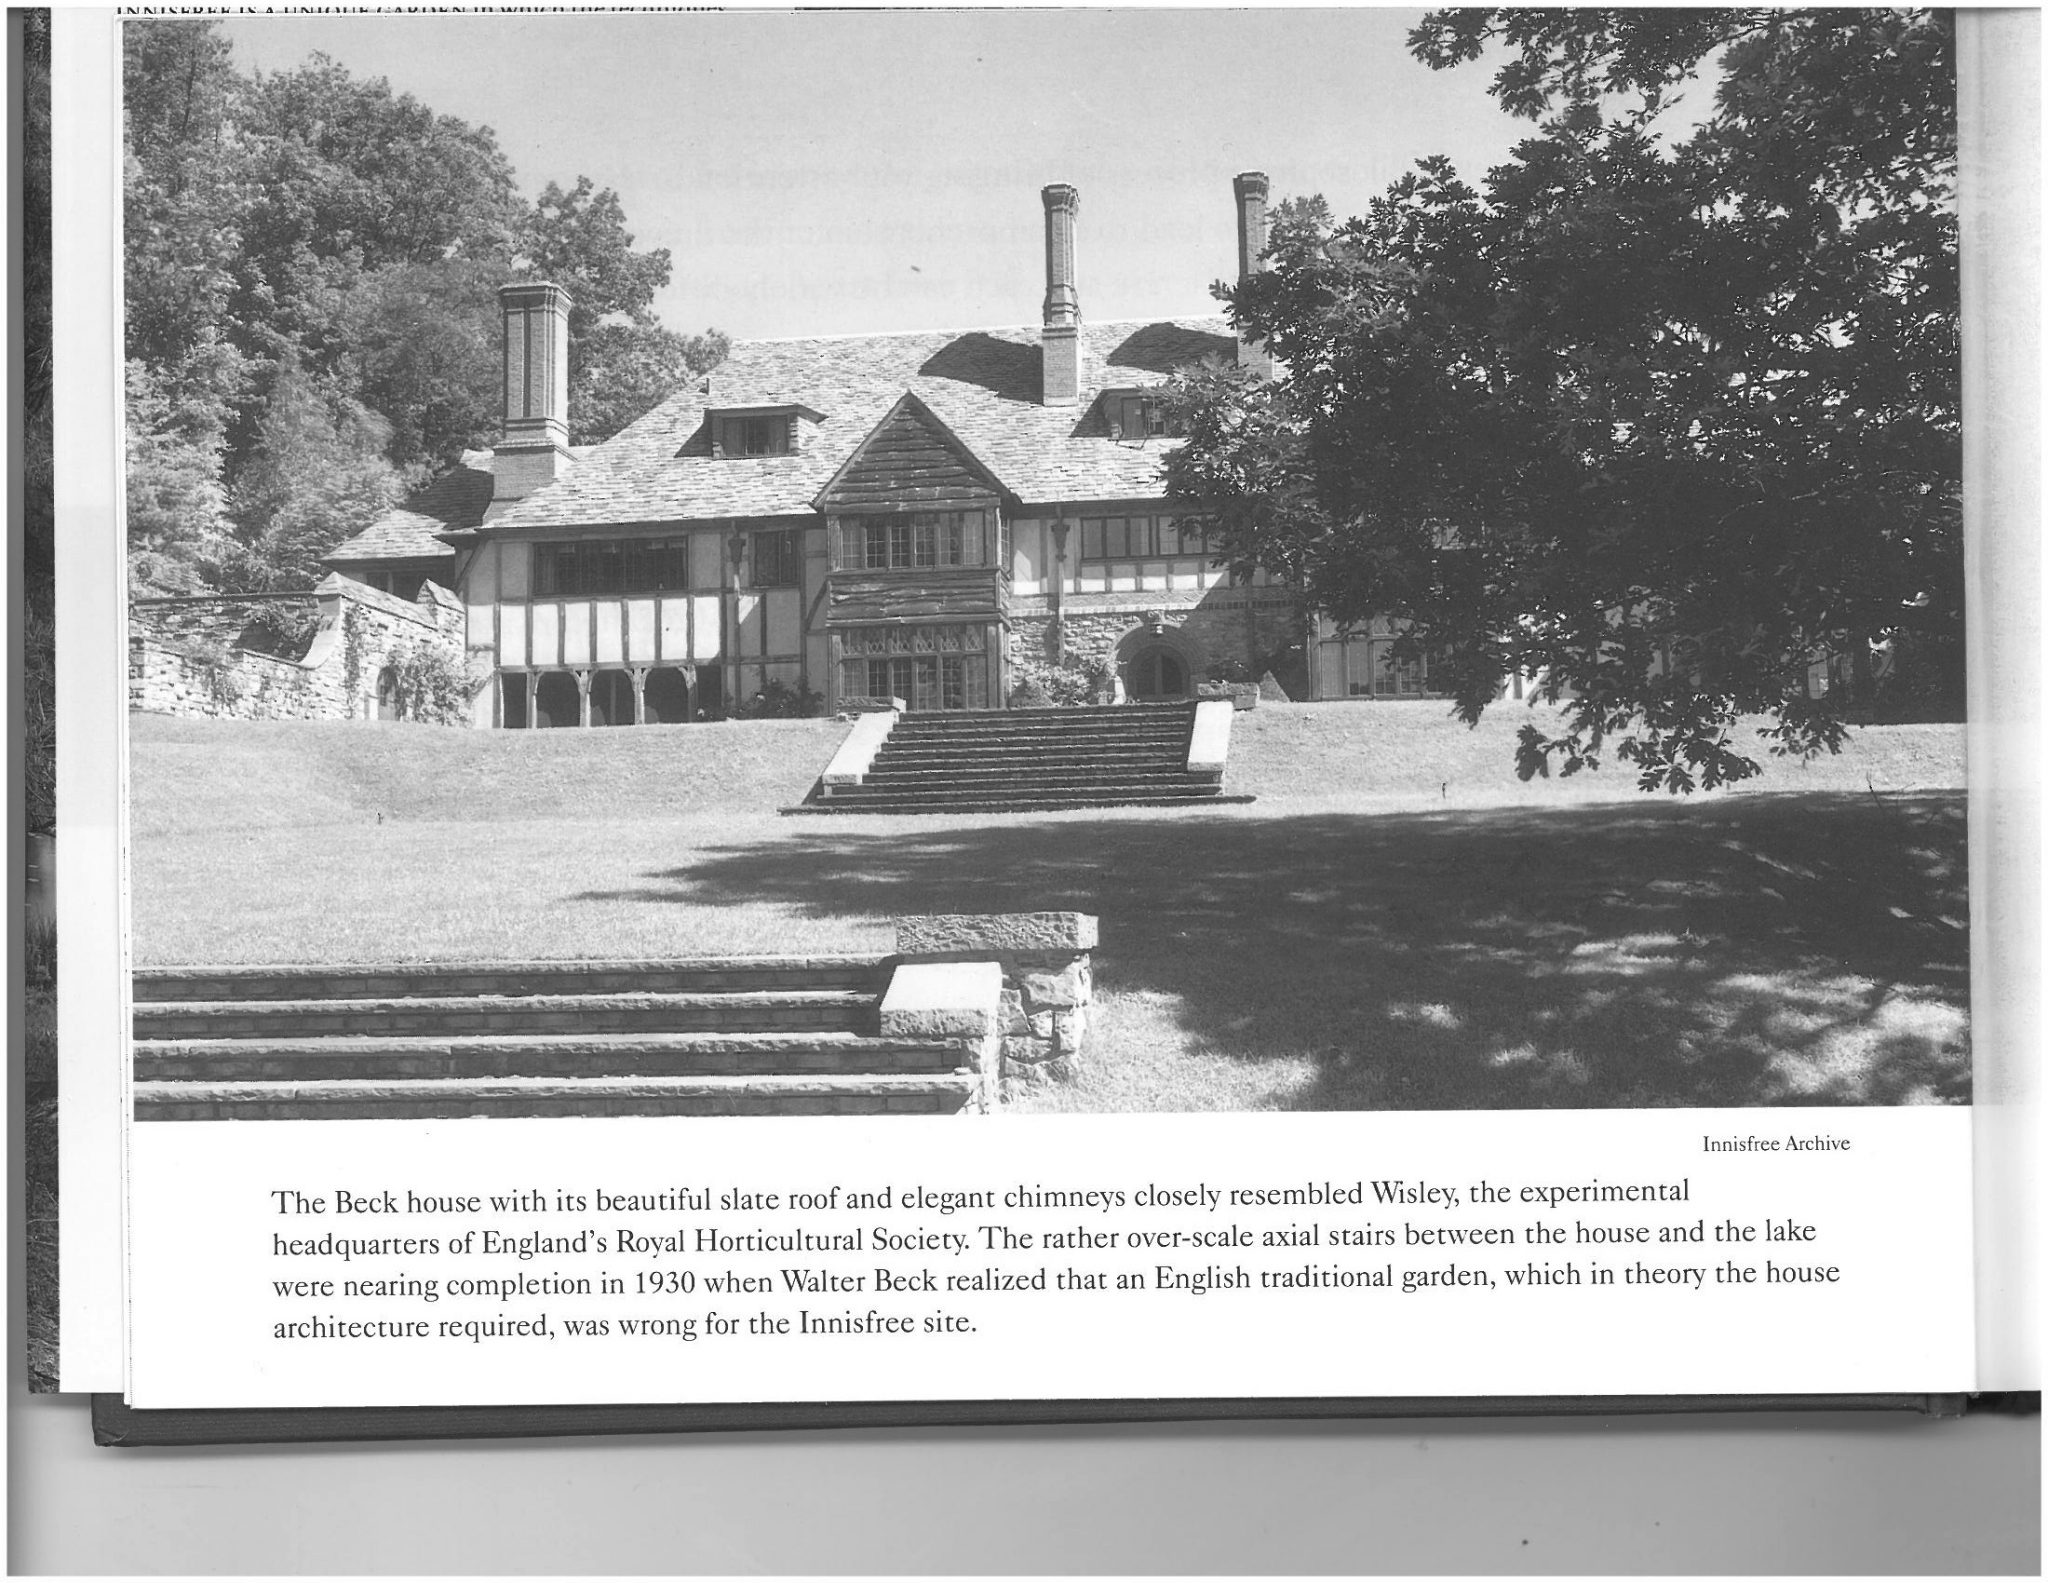 The home of Marion and Walter Beck. Image courtesy of INNISFREE: AN AMERICAN GARDEN, by Lester Collins